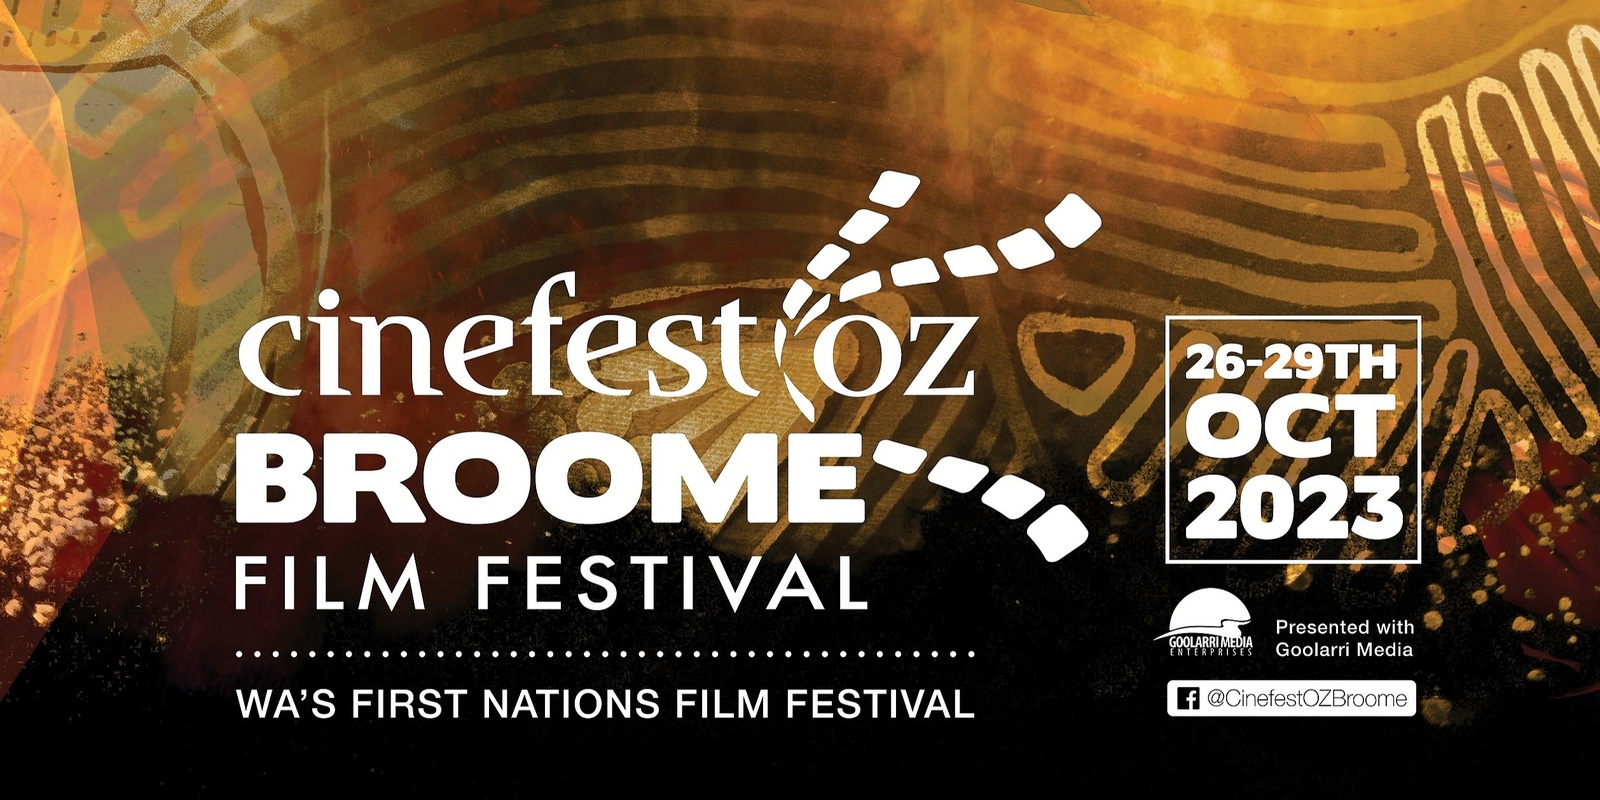 Banner image for FREE COMMUNITY SCREENING Rebel's with a Cause - CinefestOZ Broome First Nations Film Festival